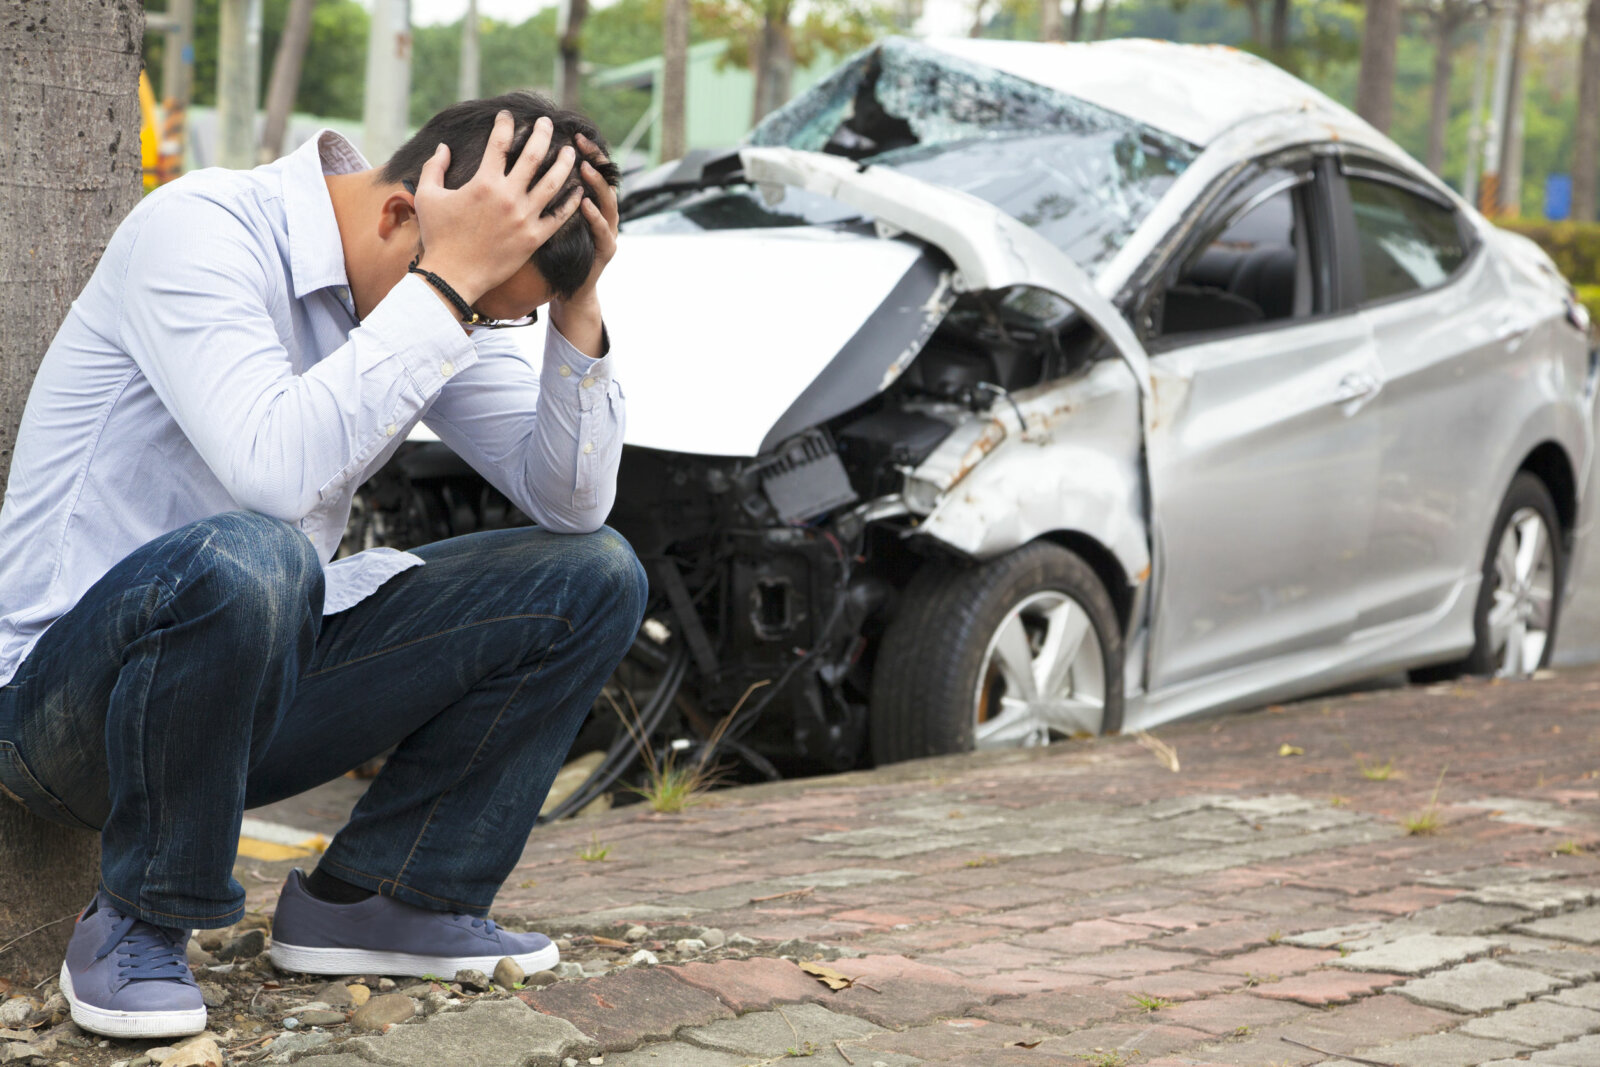 Contact the best female Personal Injury Attorneys in Atlanta Area 